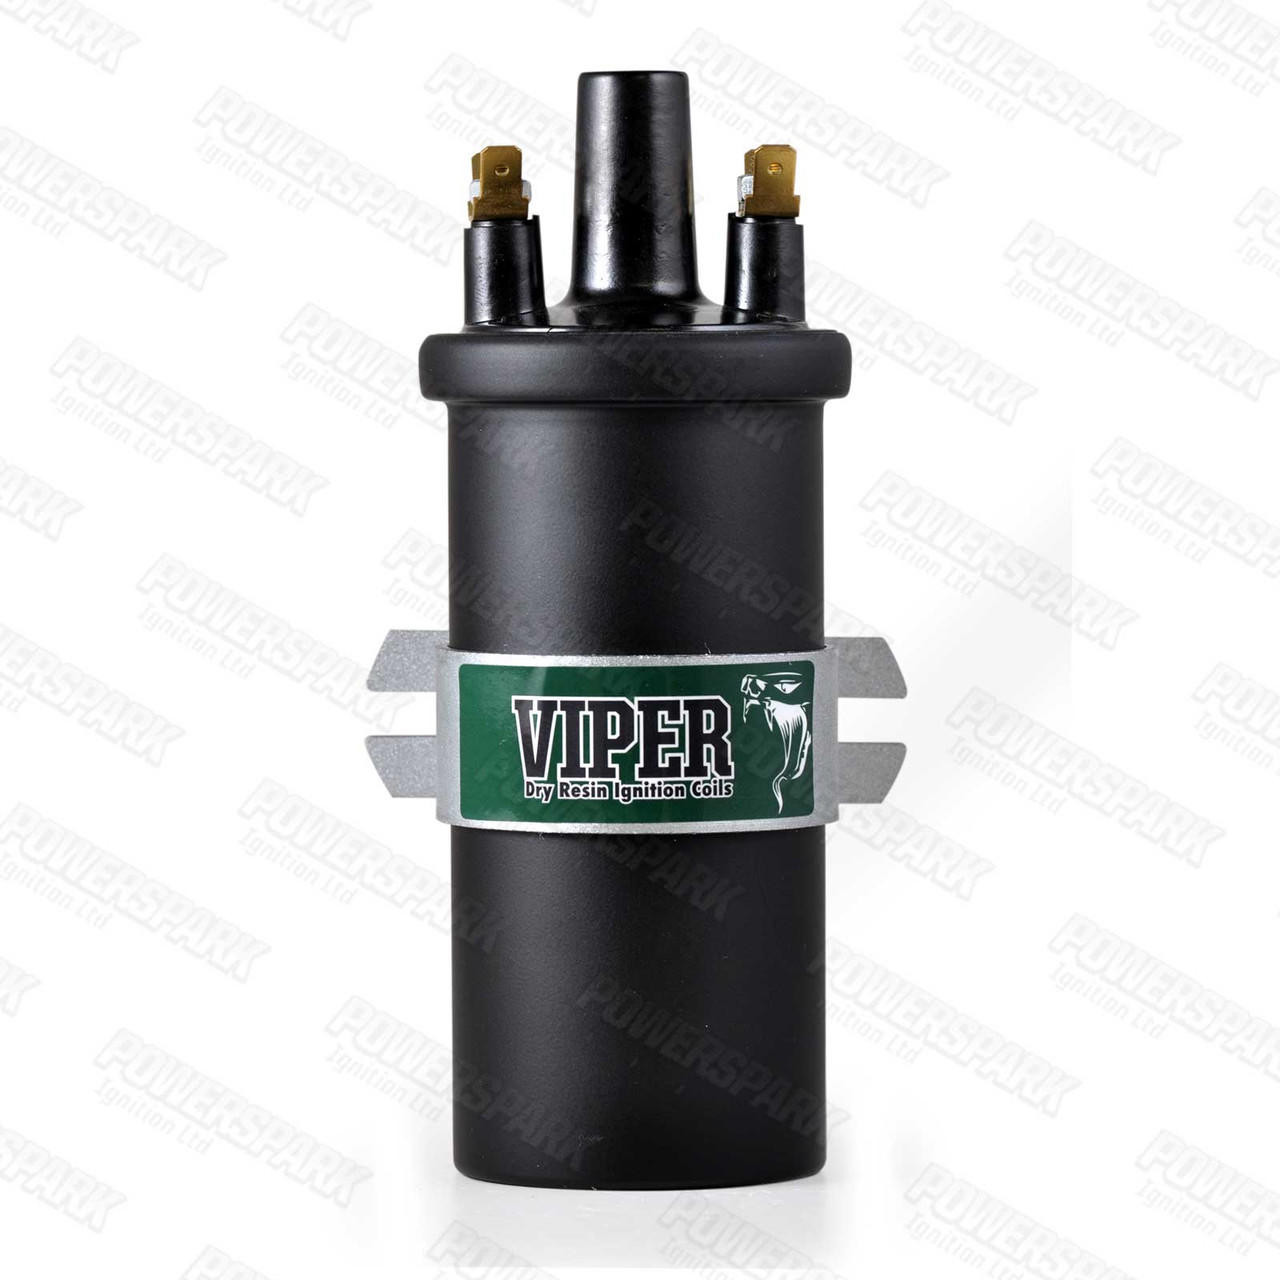  Viper Dry Ignition Coil Ballast replaces Lucas DLB110 DLB102